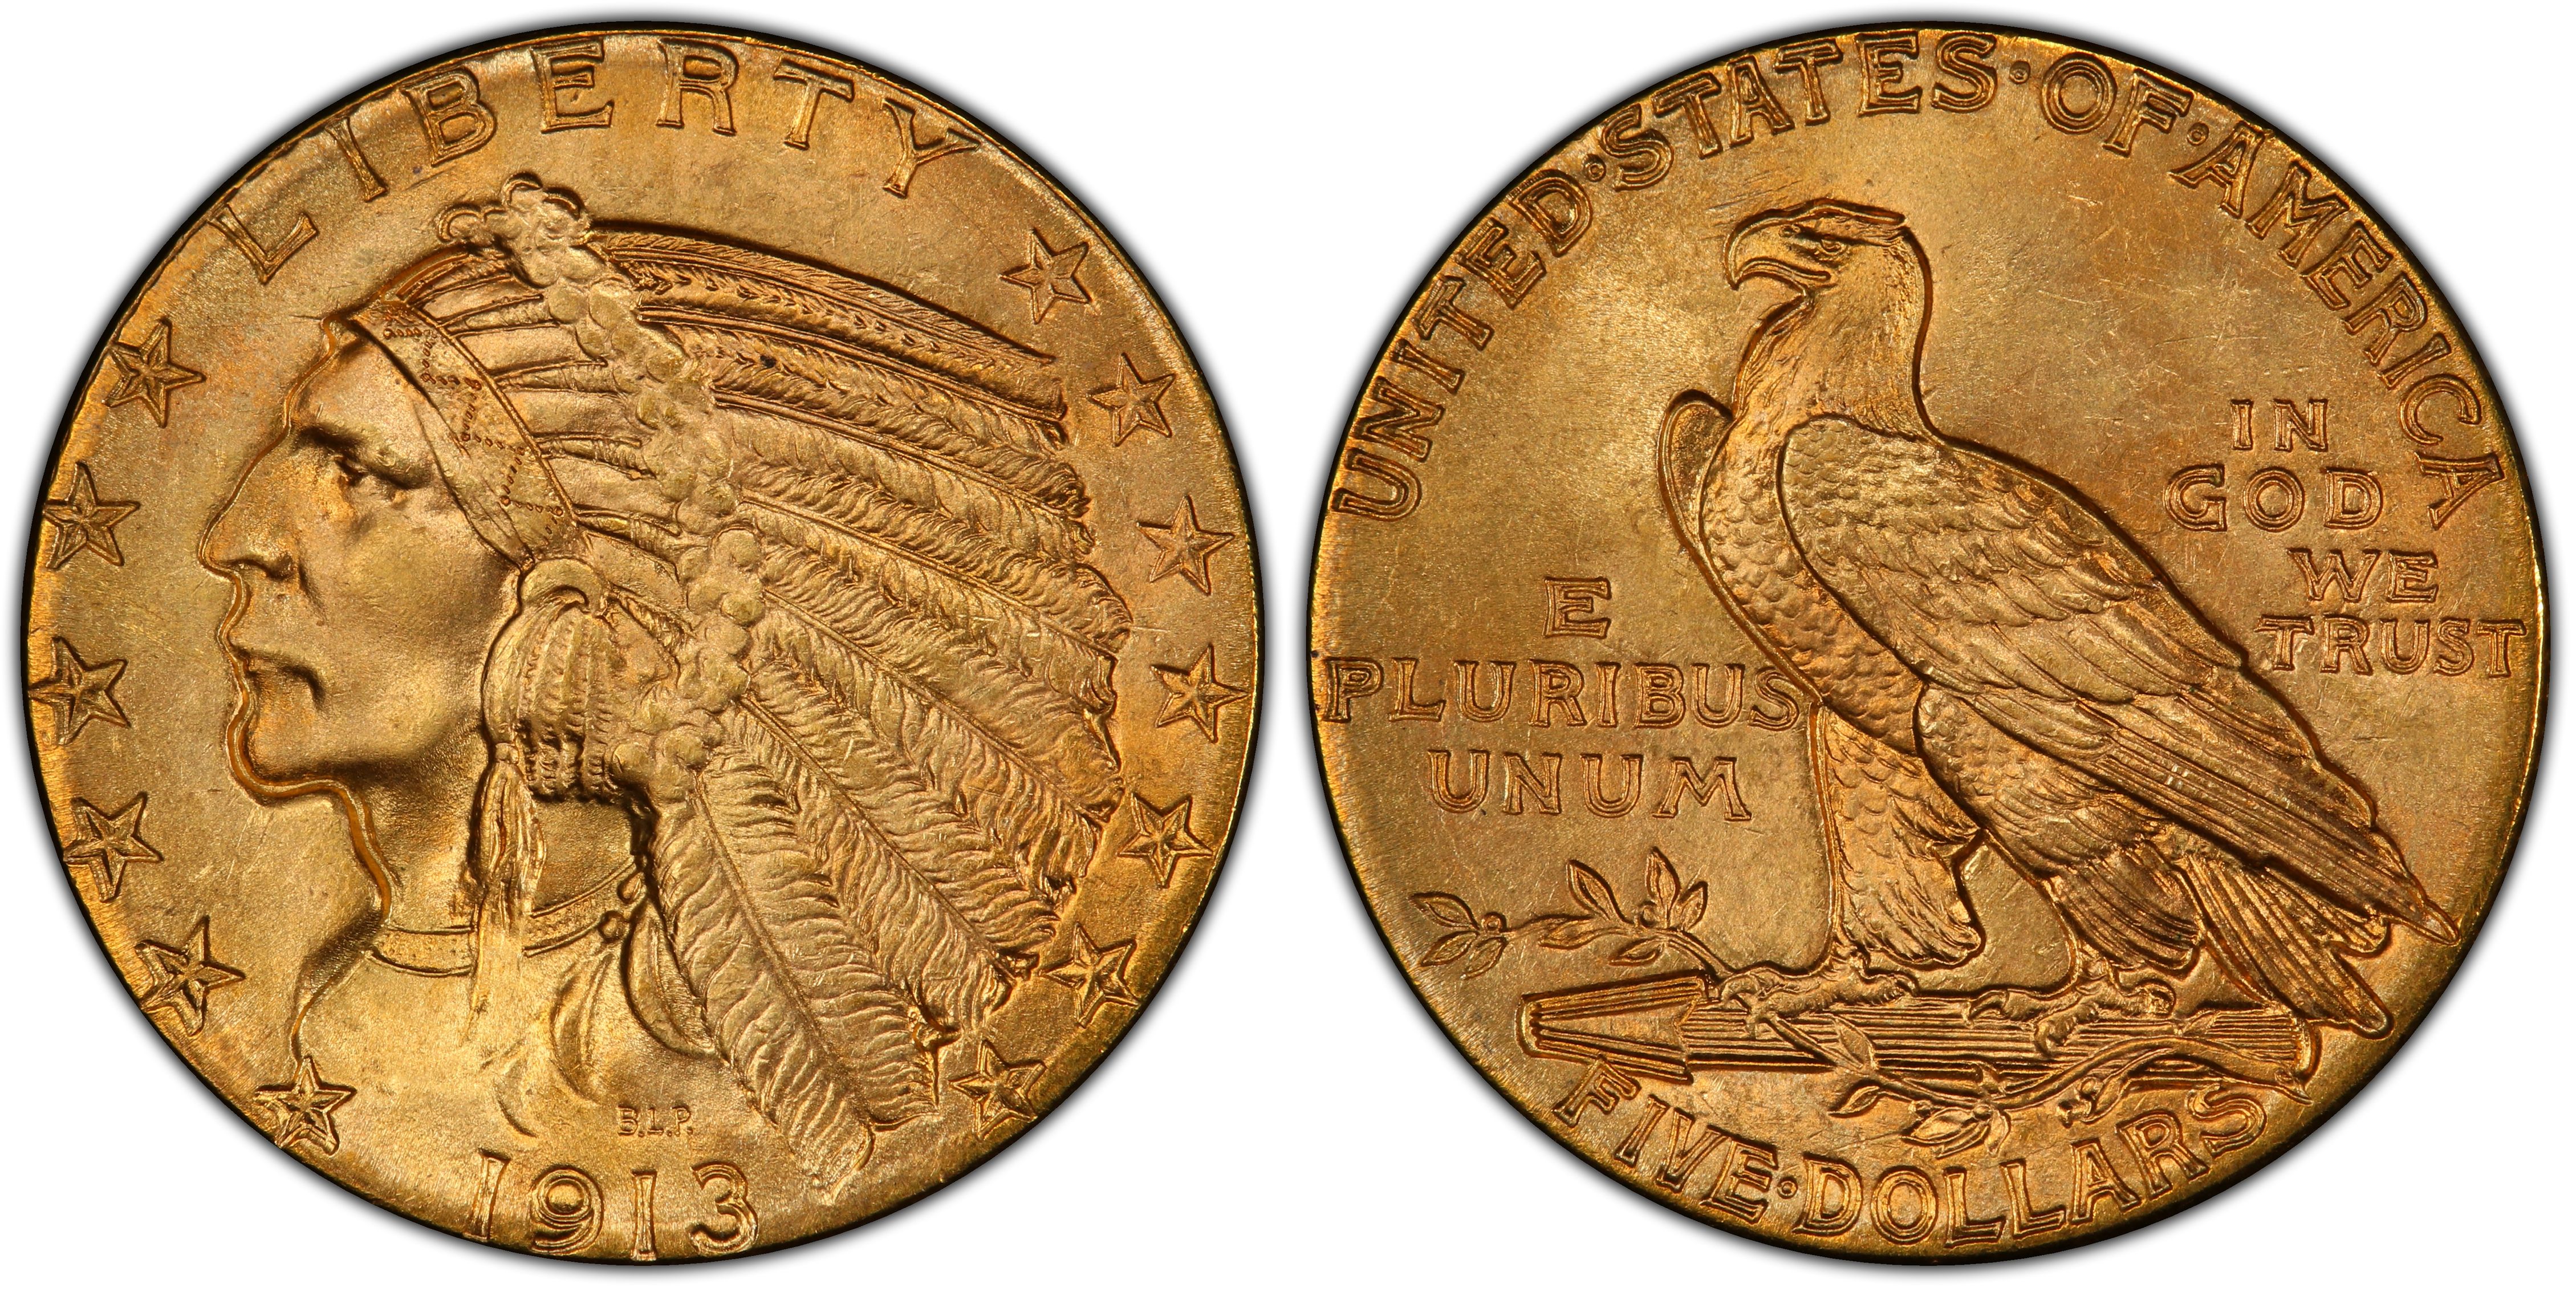 1913 $5 (Regular Strike) Indian $5 - PCGS CoinFacts